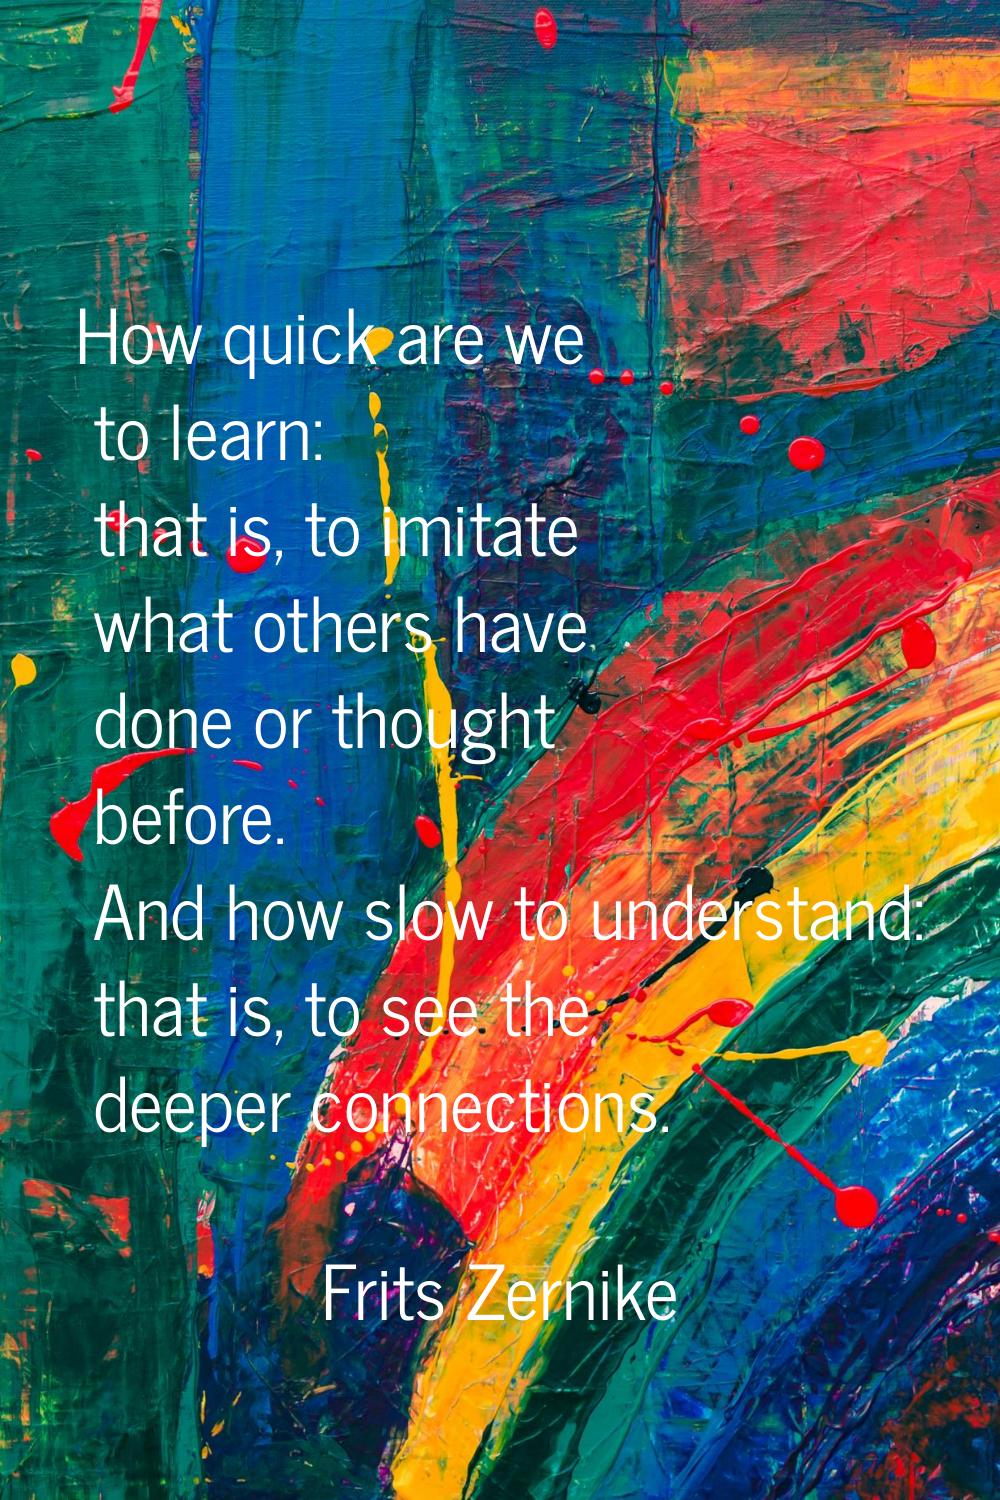 How quick are we to learn: that is, to imitate what others have done or thought before. And how slo